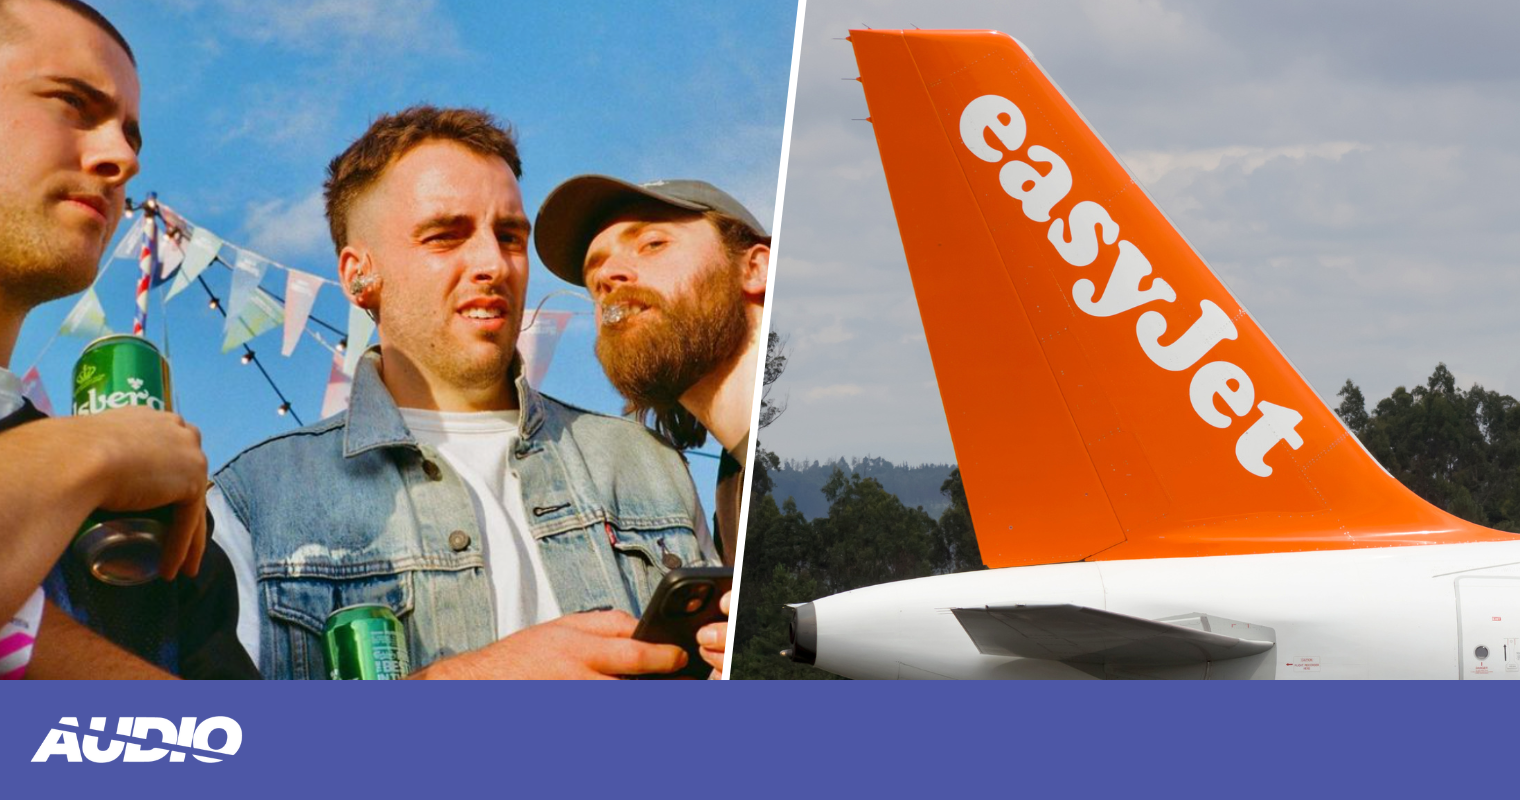 Tour poster featuring Photoshopped plane plays a key role in EasyJet's  trademark lawsuit against Easy Life